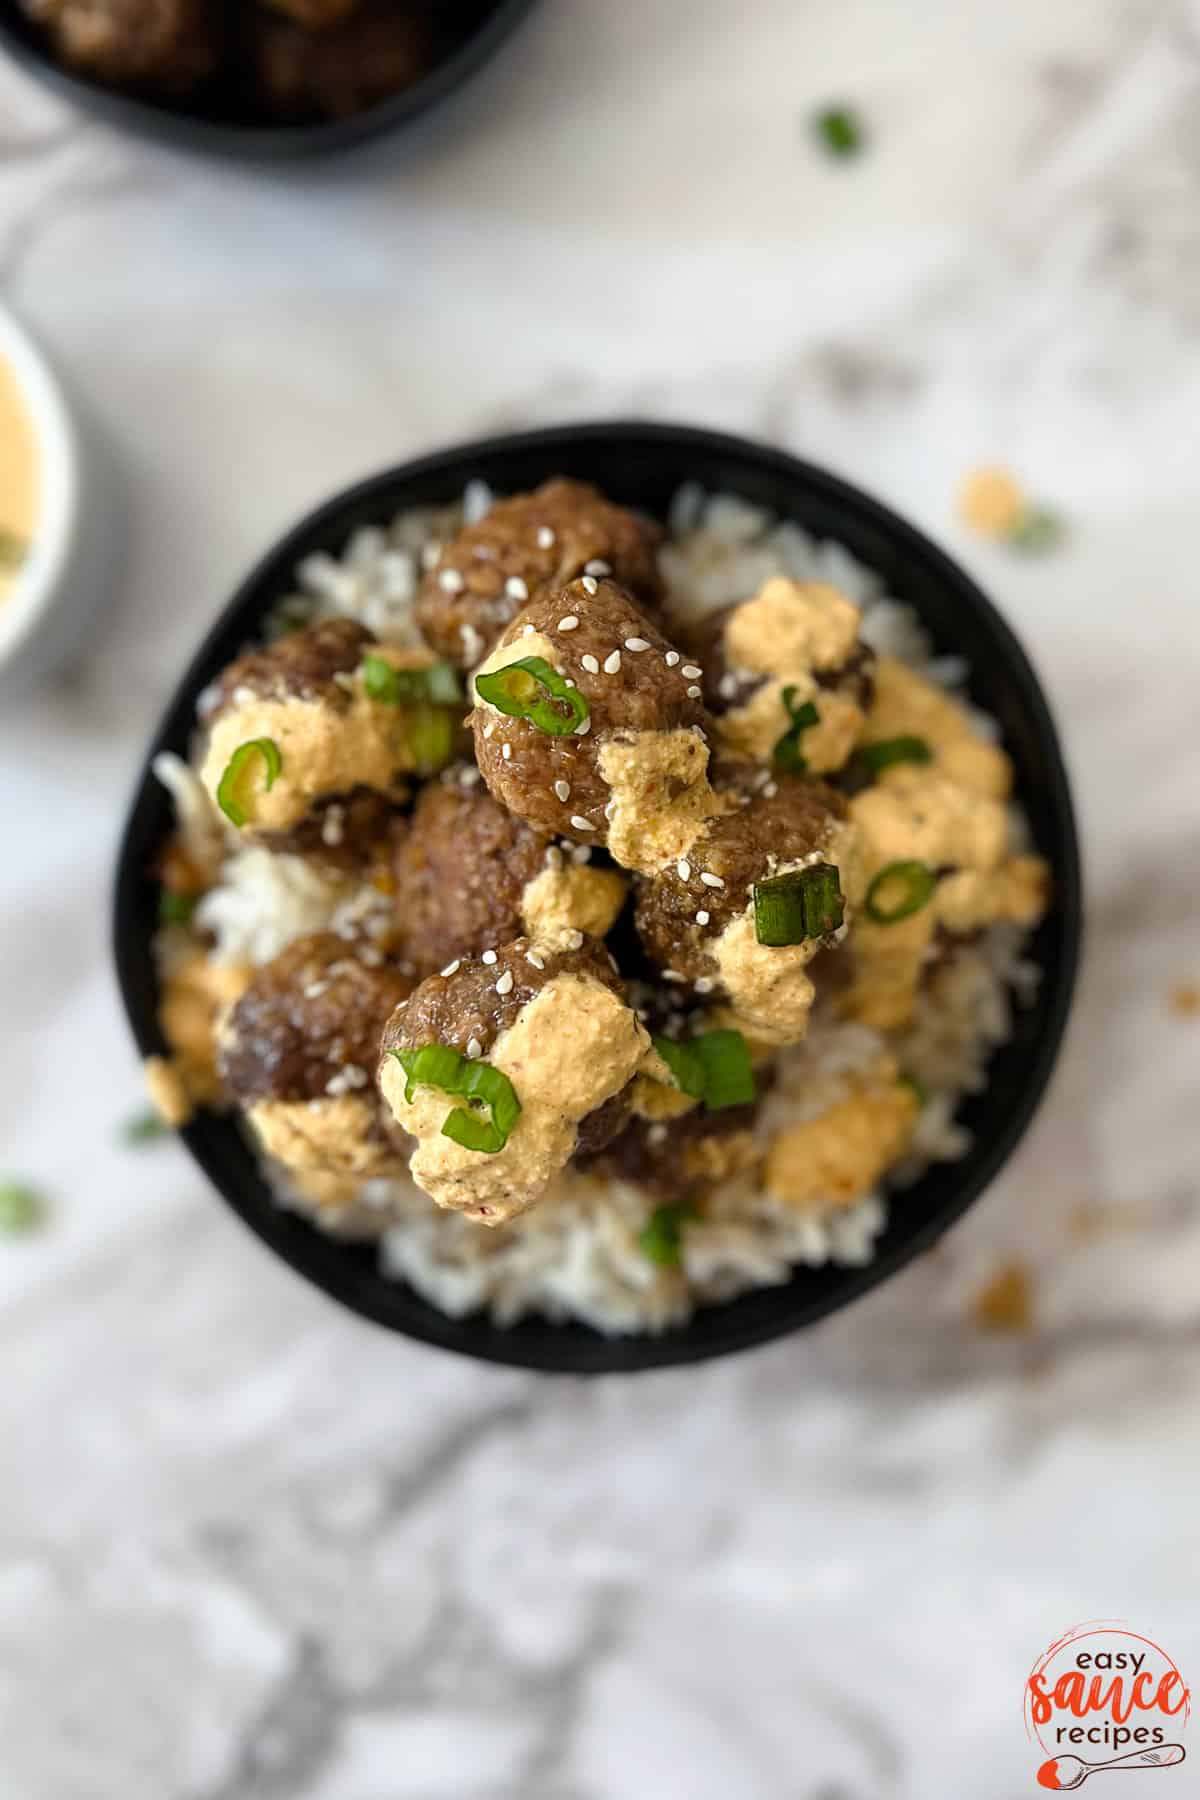 kimchi mayo drizzled over meatballs in white rice